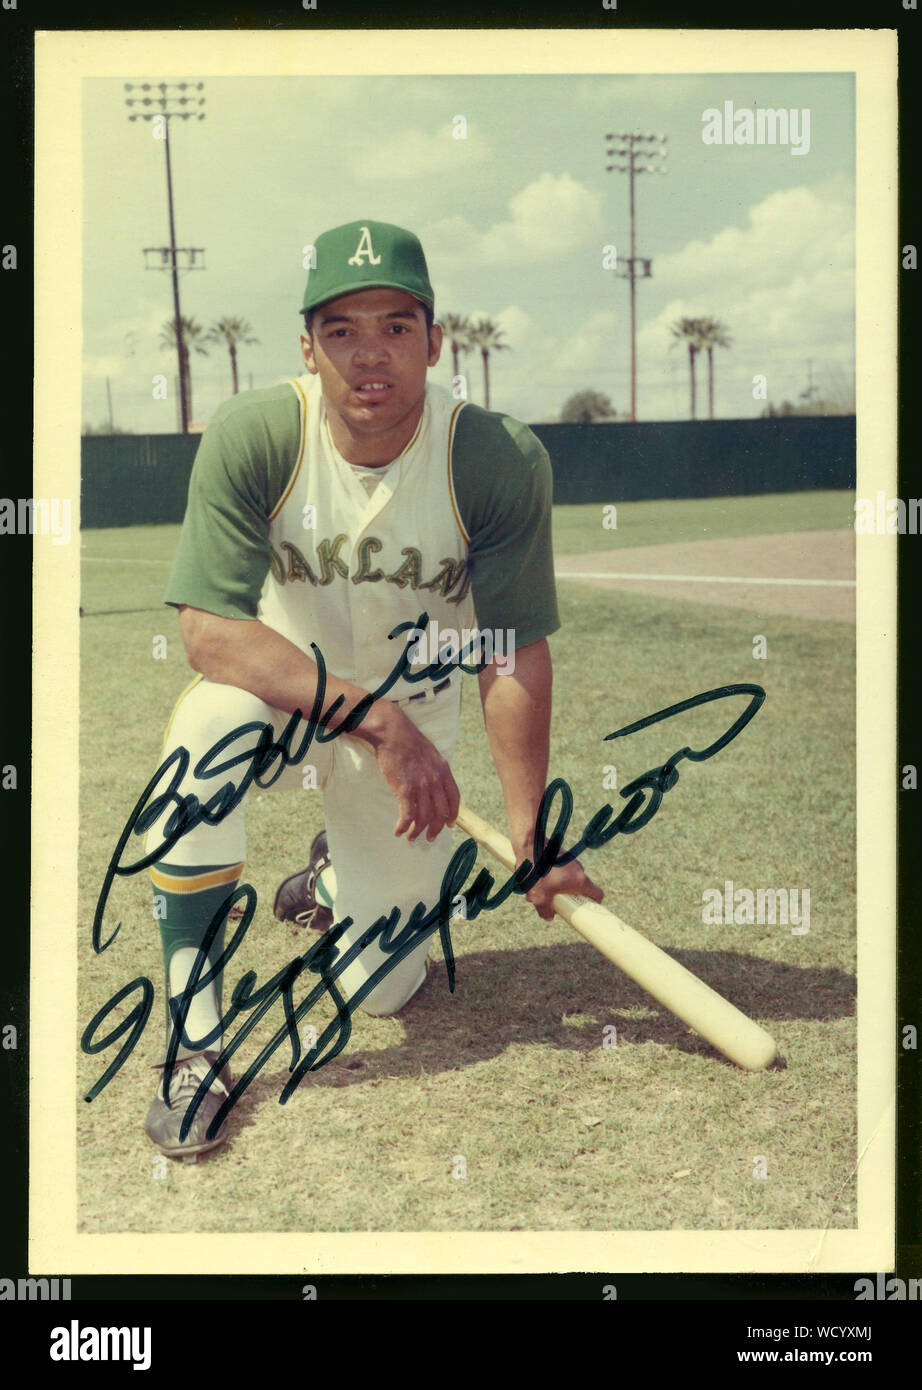 Autographed color snapshot of Reggie Jackson who was a Hall of Fame baseball player with the Oakland As, New York Yankees and other teams from the 1960s to the 1980s. Stock Photo